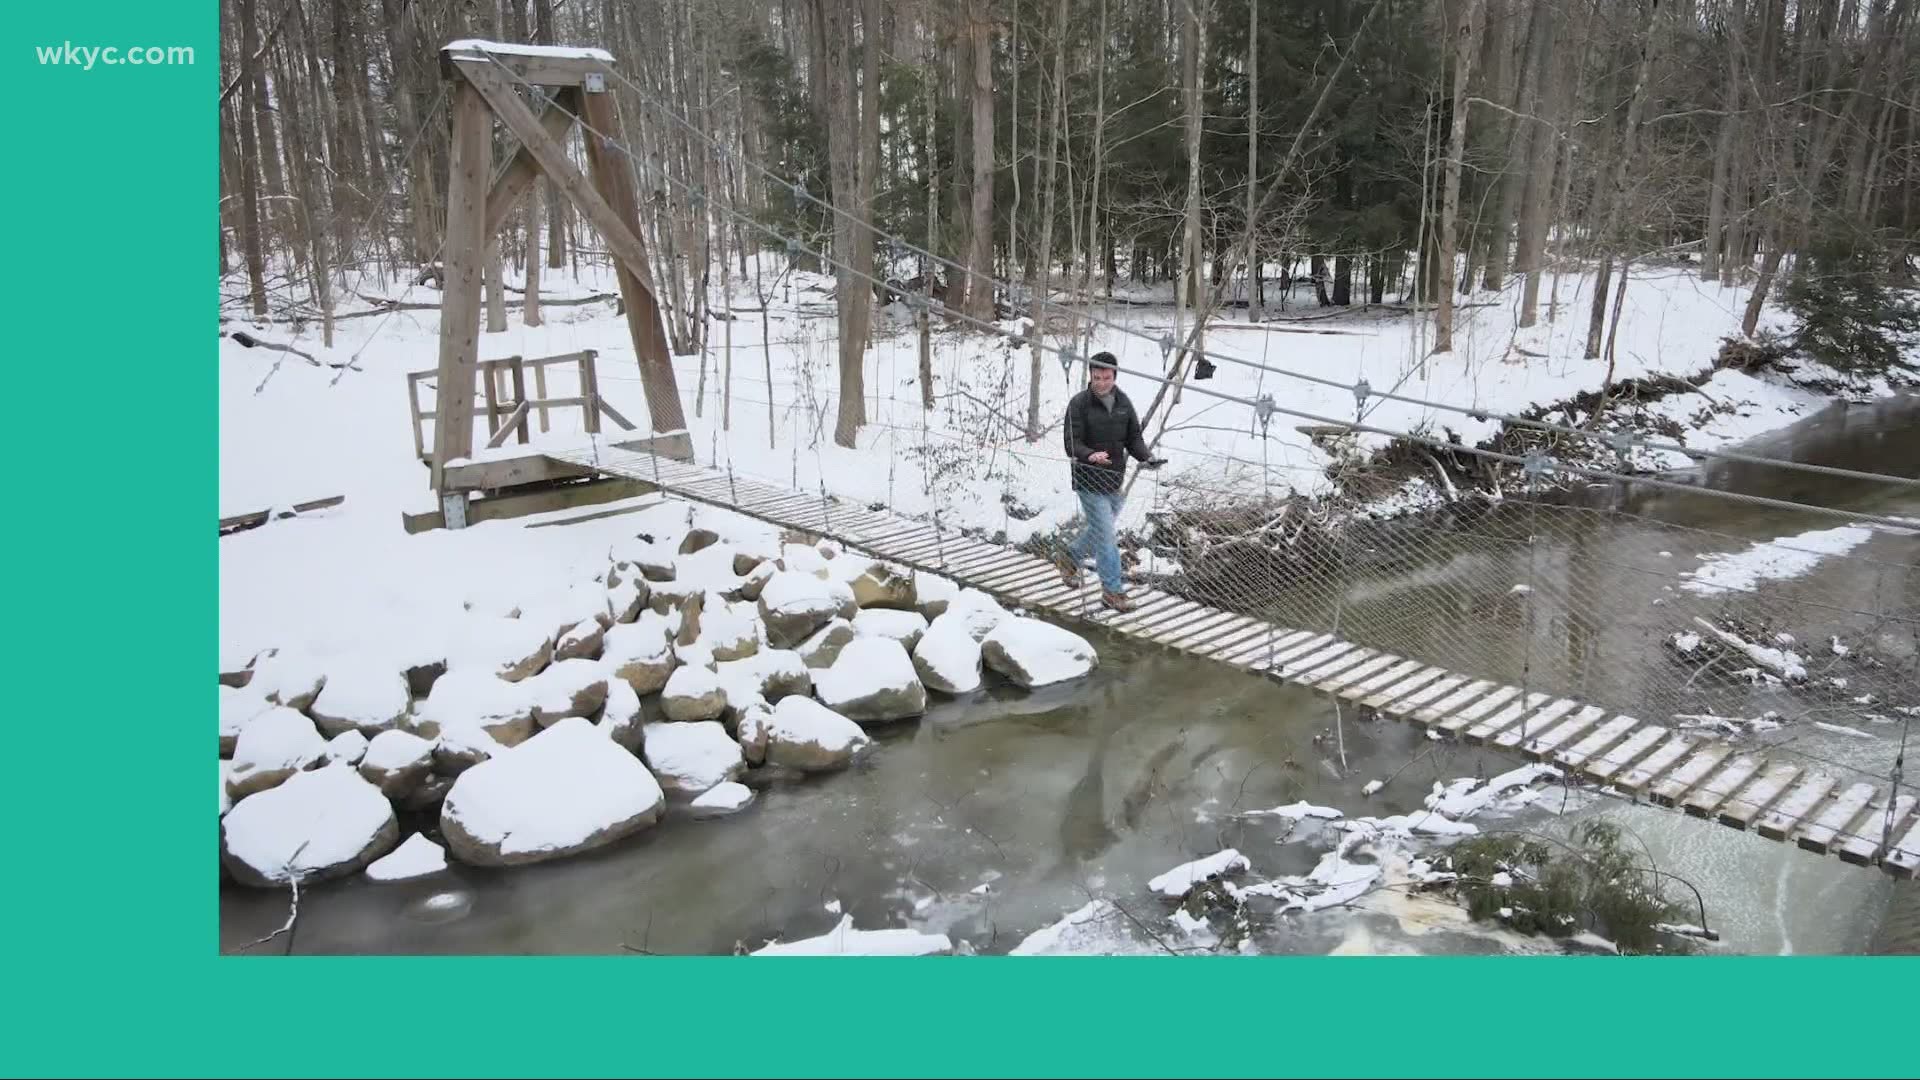 Jan. 29, 2021: At Girdled Road Reservation in Chardon, a 942-acre Lake County metropark, there is a 90-foot suspension bridge that crosses the Big Creek.